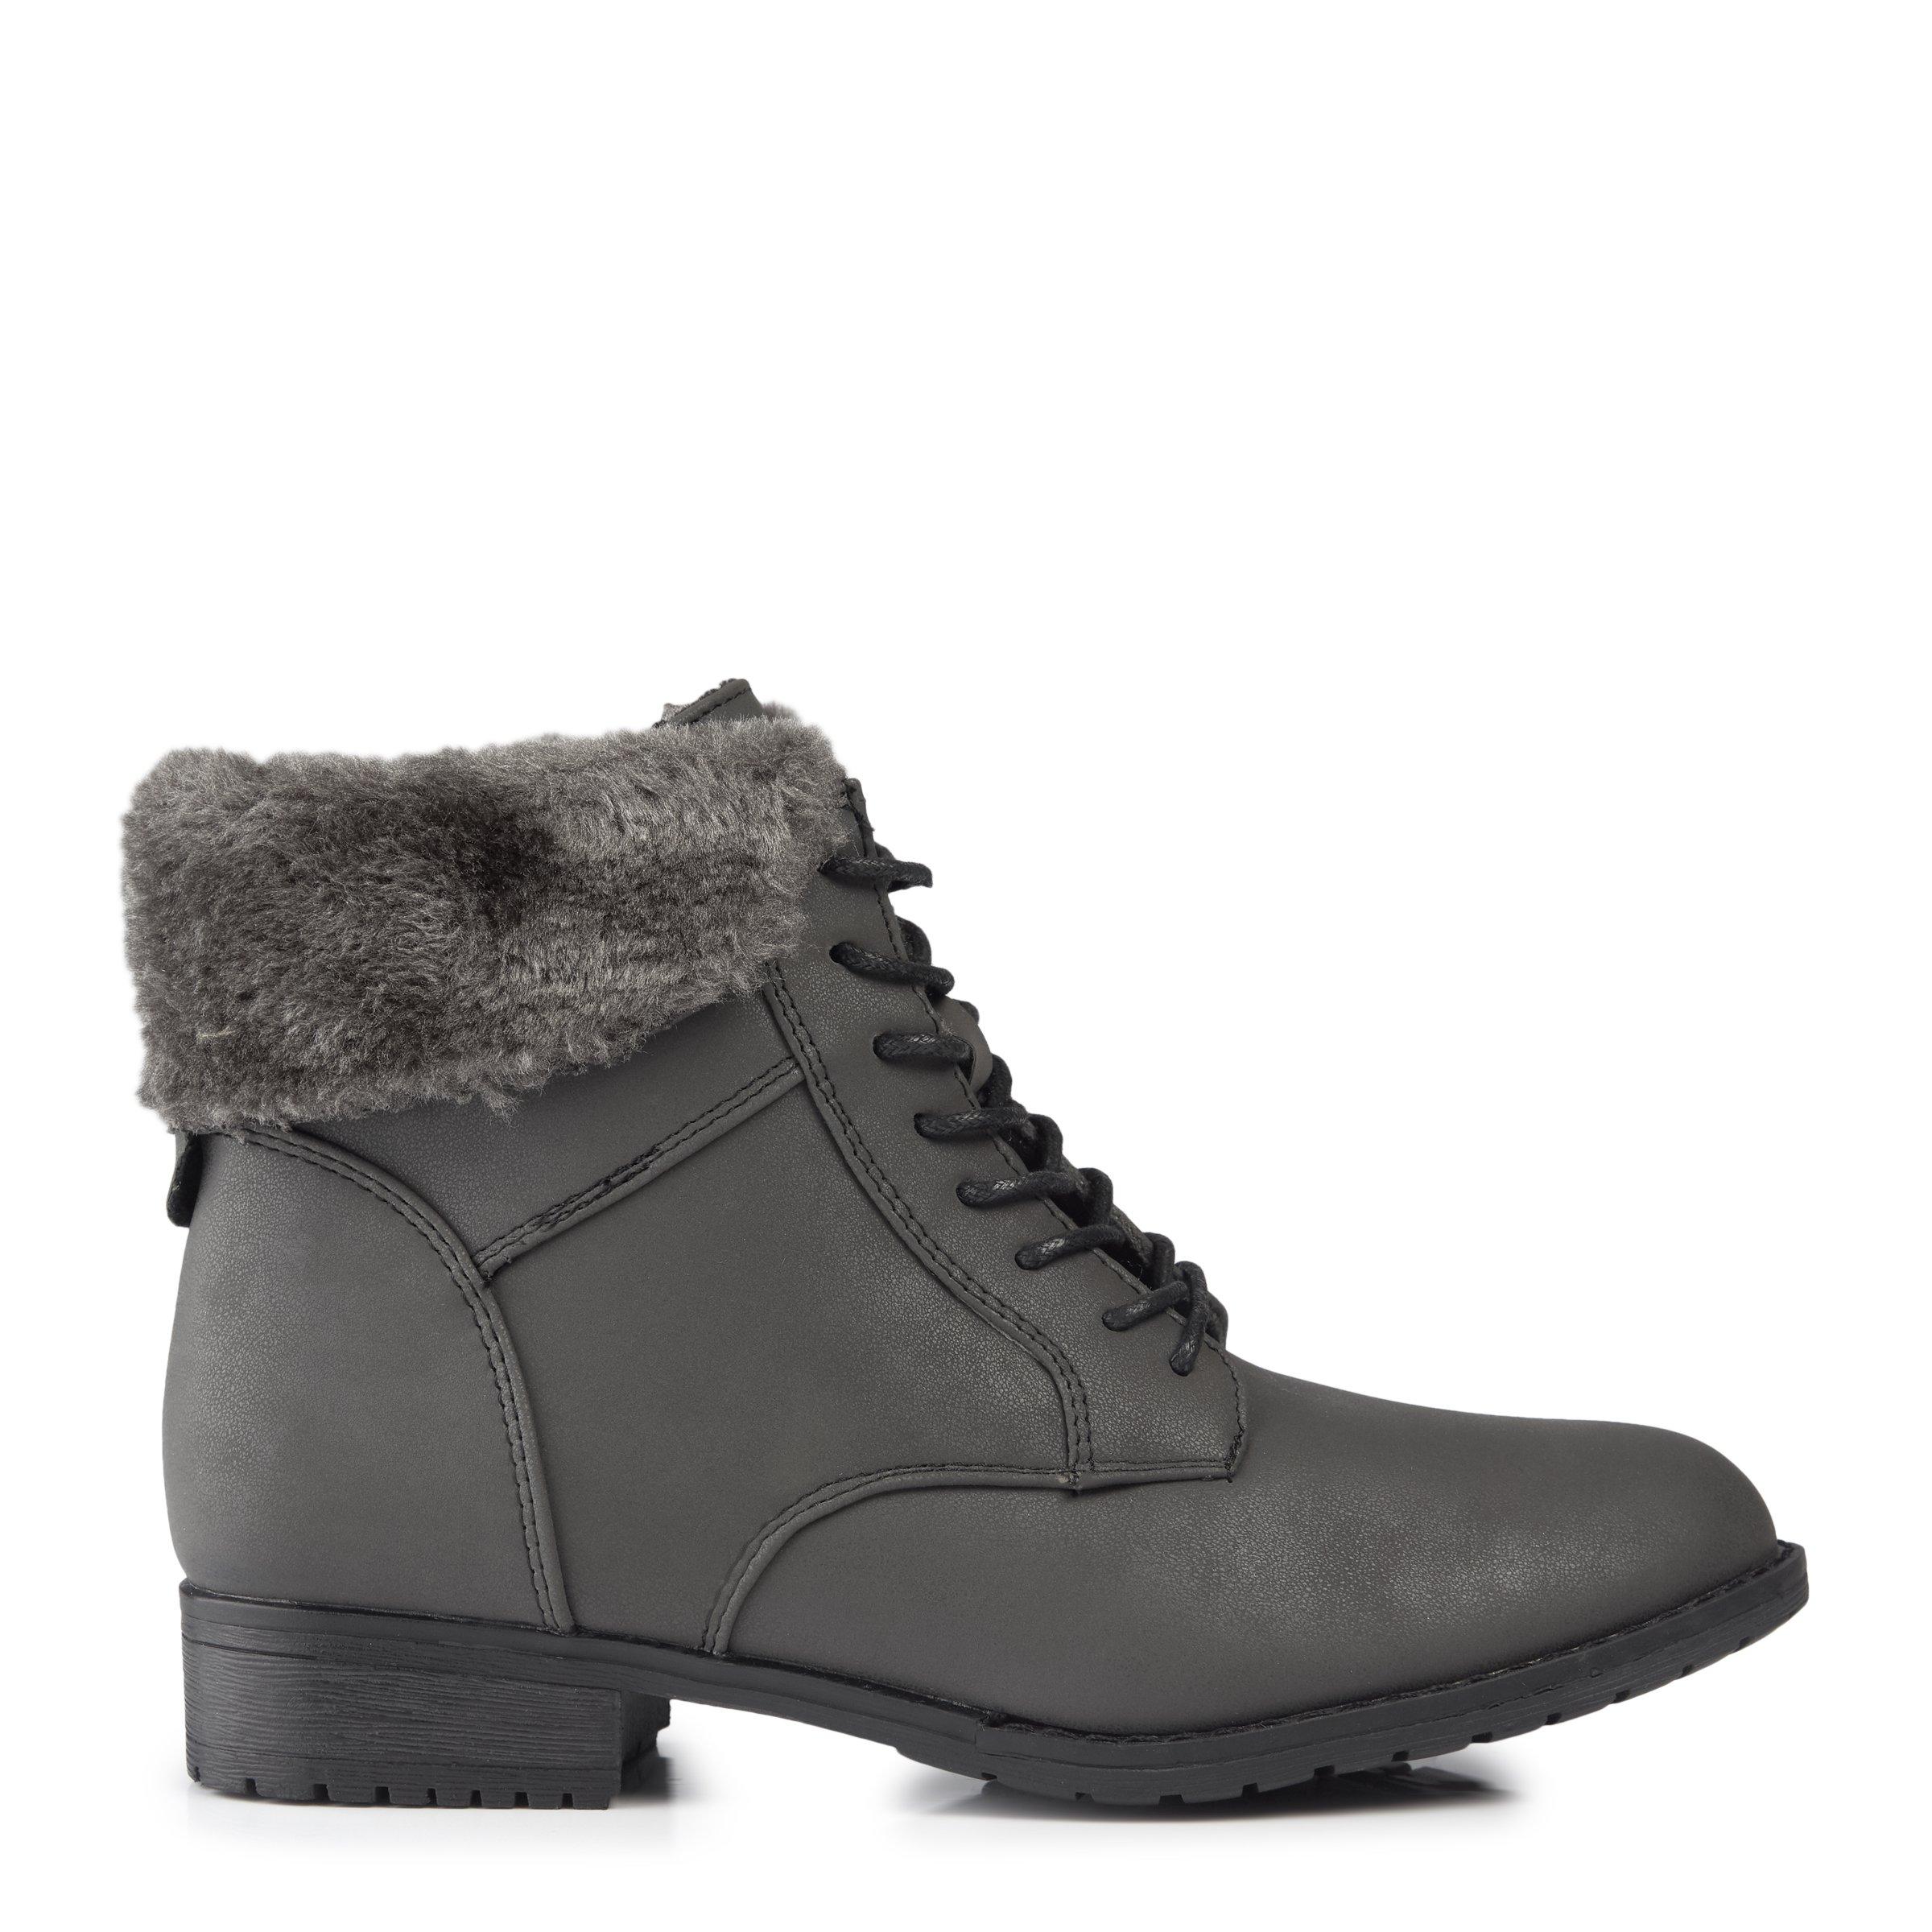 Truworths Charcoal Lace Up Boot